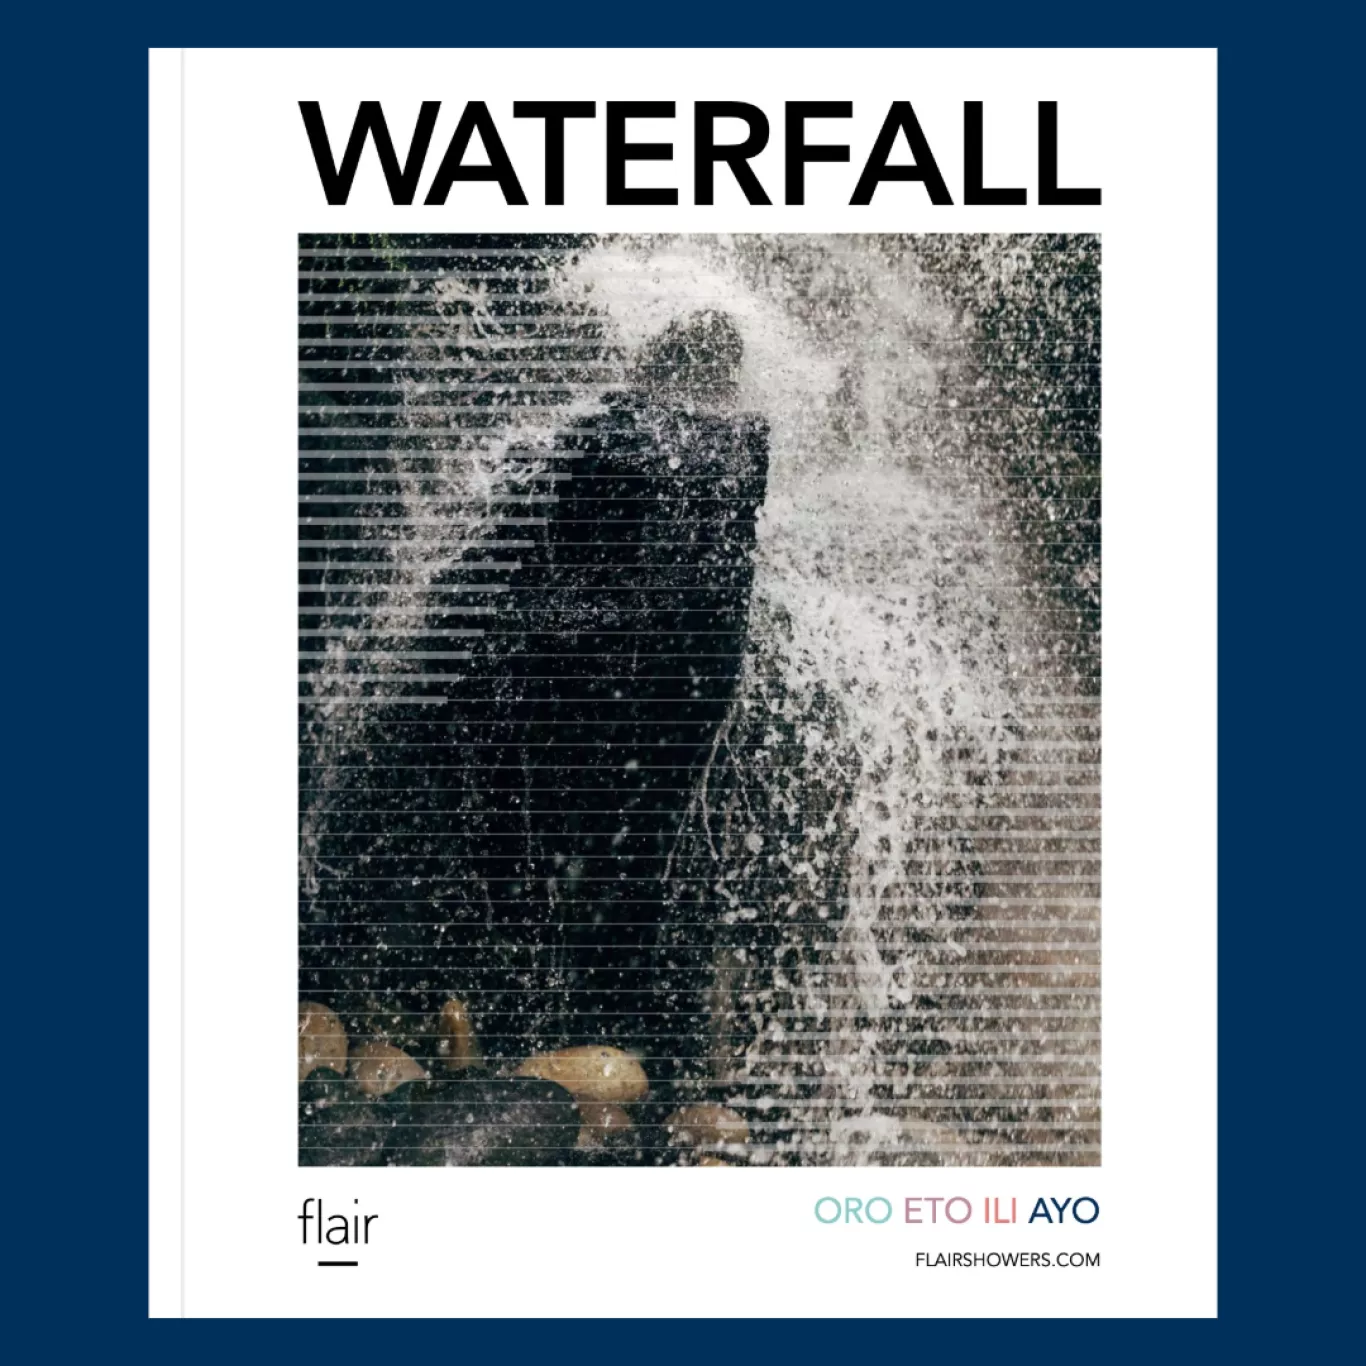 Waterfall Cover Image Square